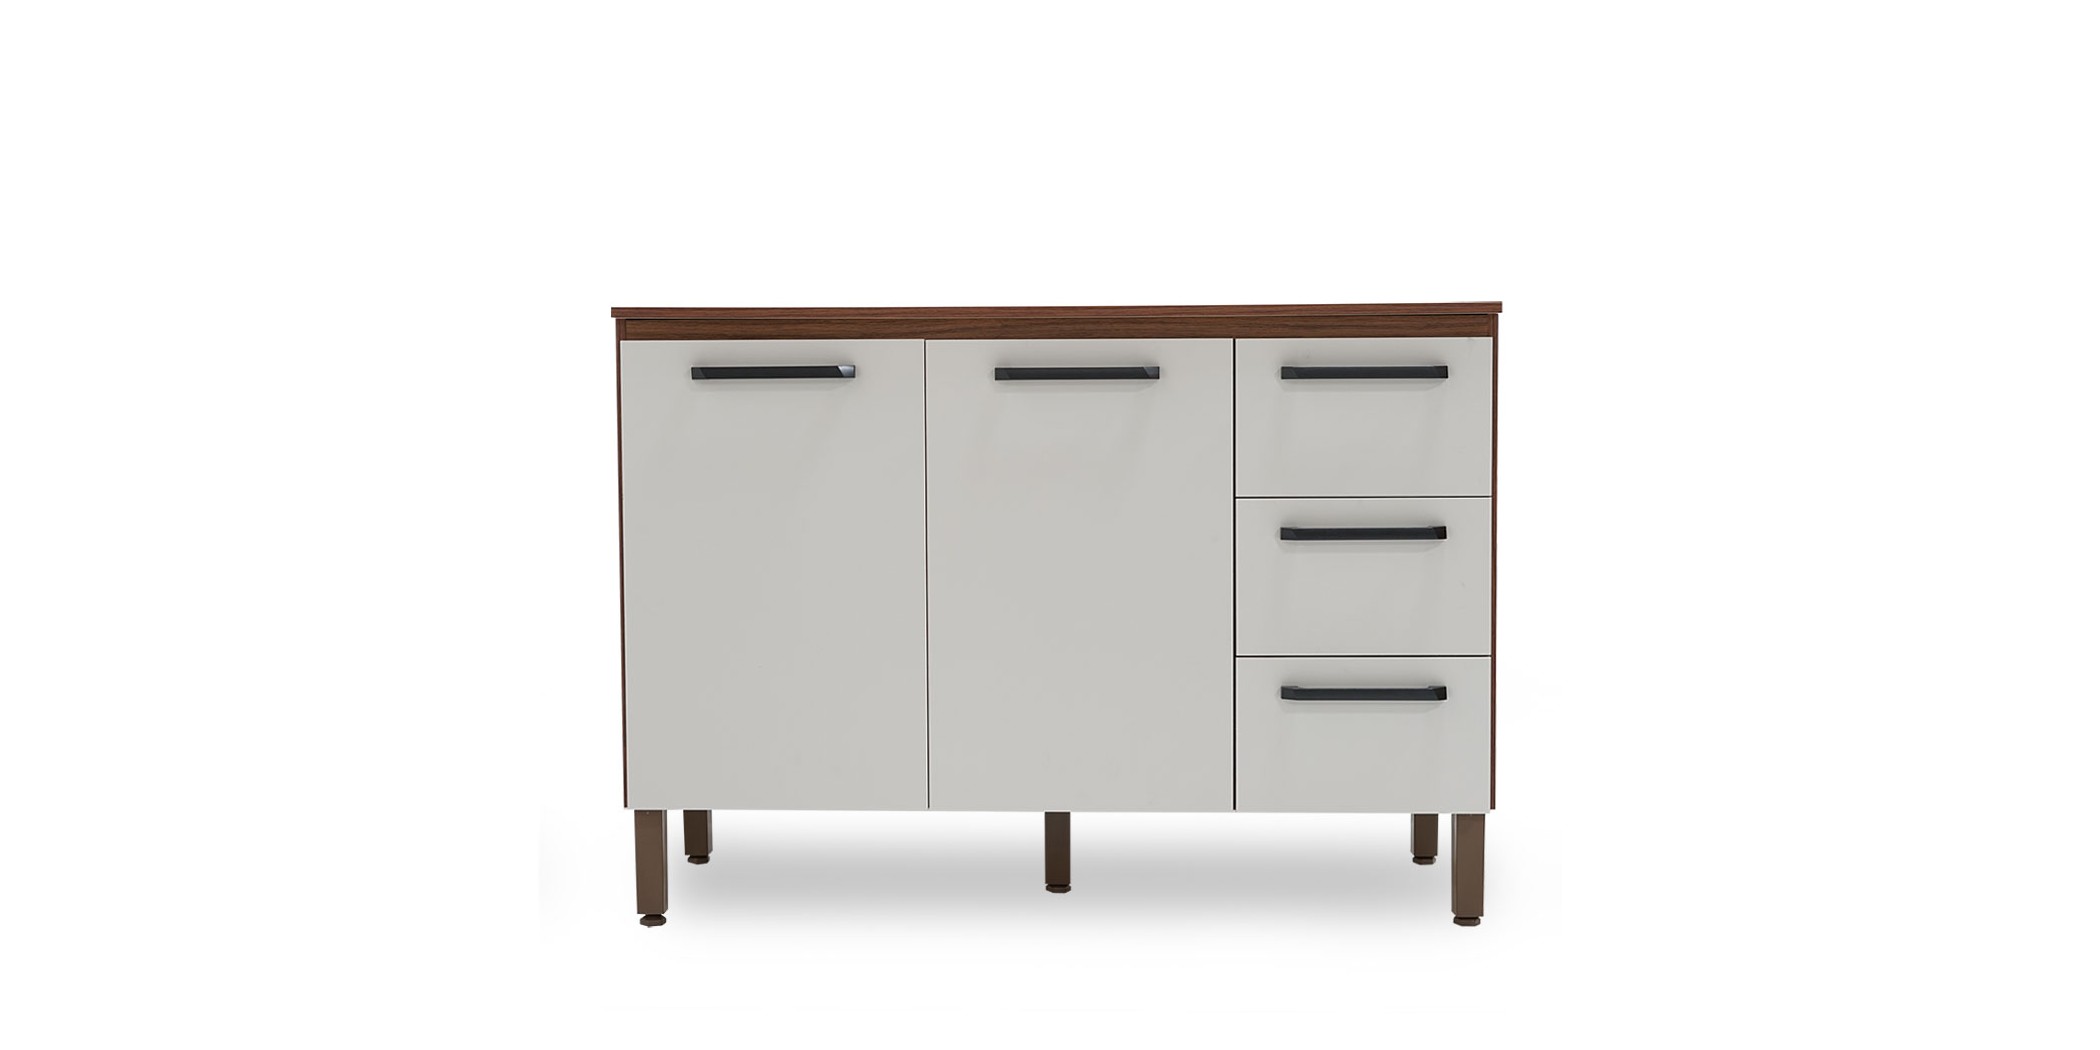 Ametista Kitchen Cabinet 2 Doors & 3 Drawers Off White